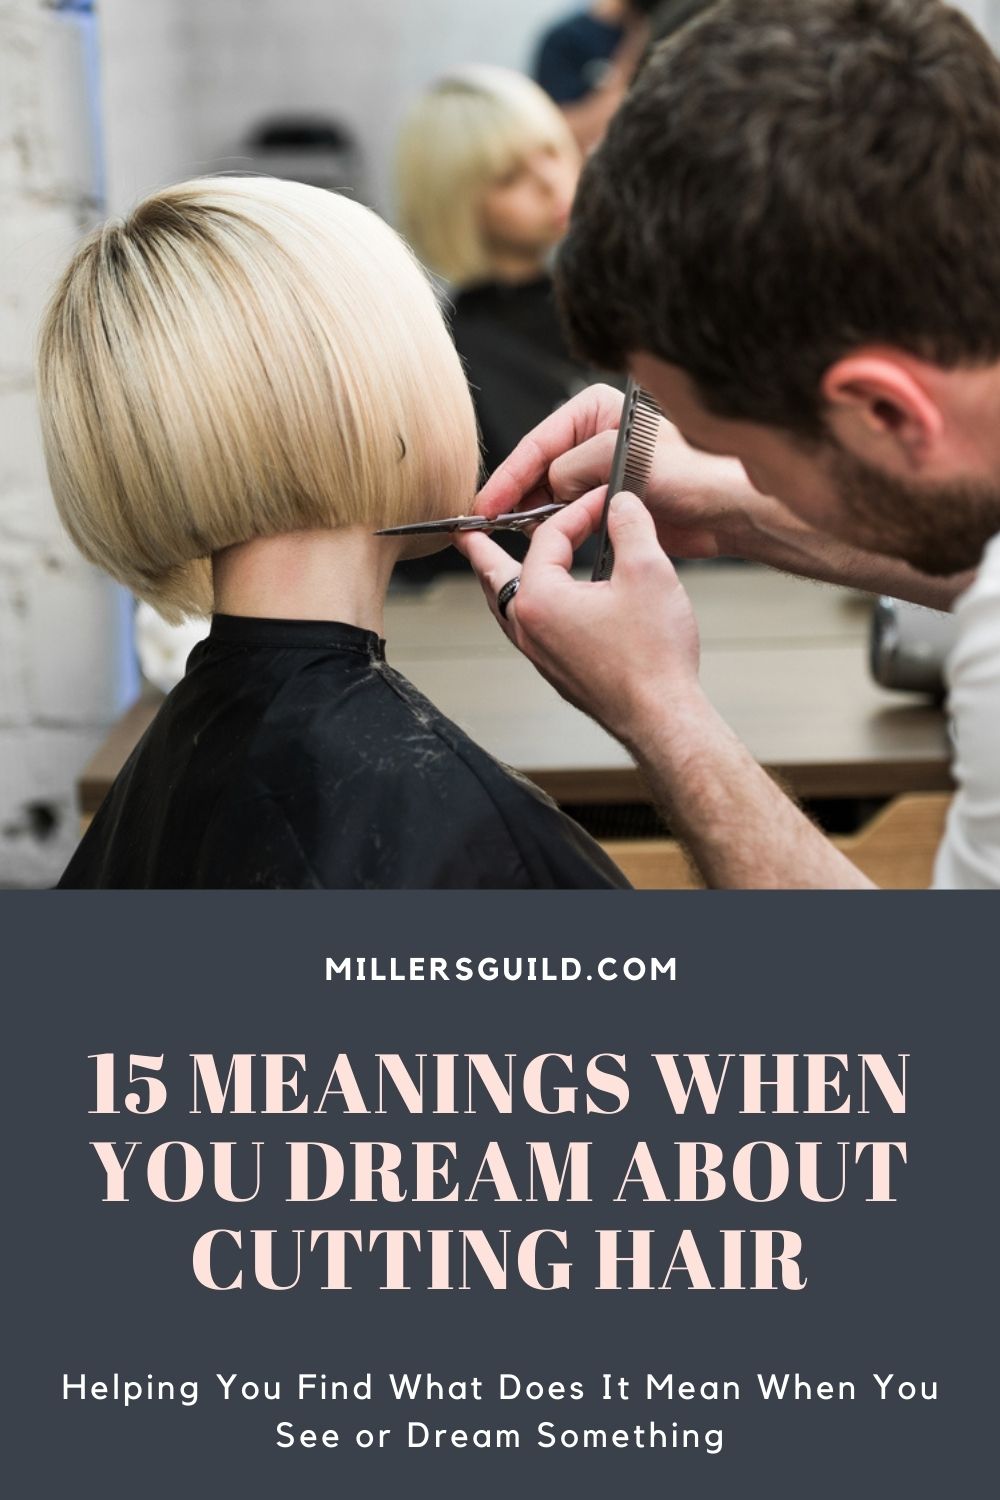 15 Meanings When You Dream About Cutting Hair